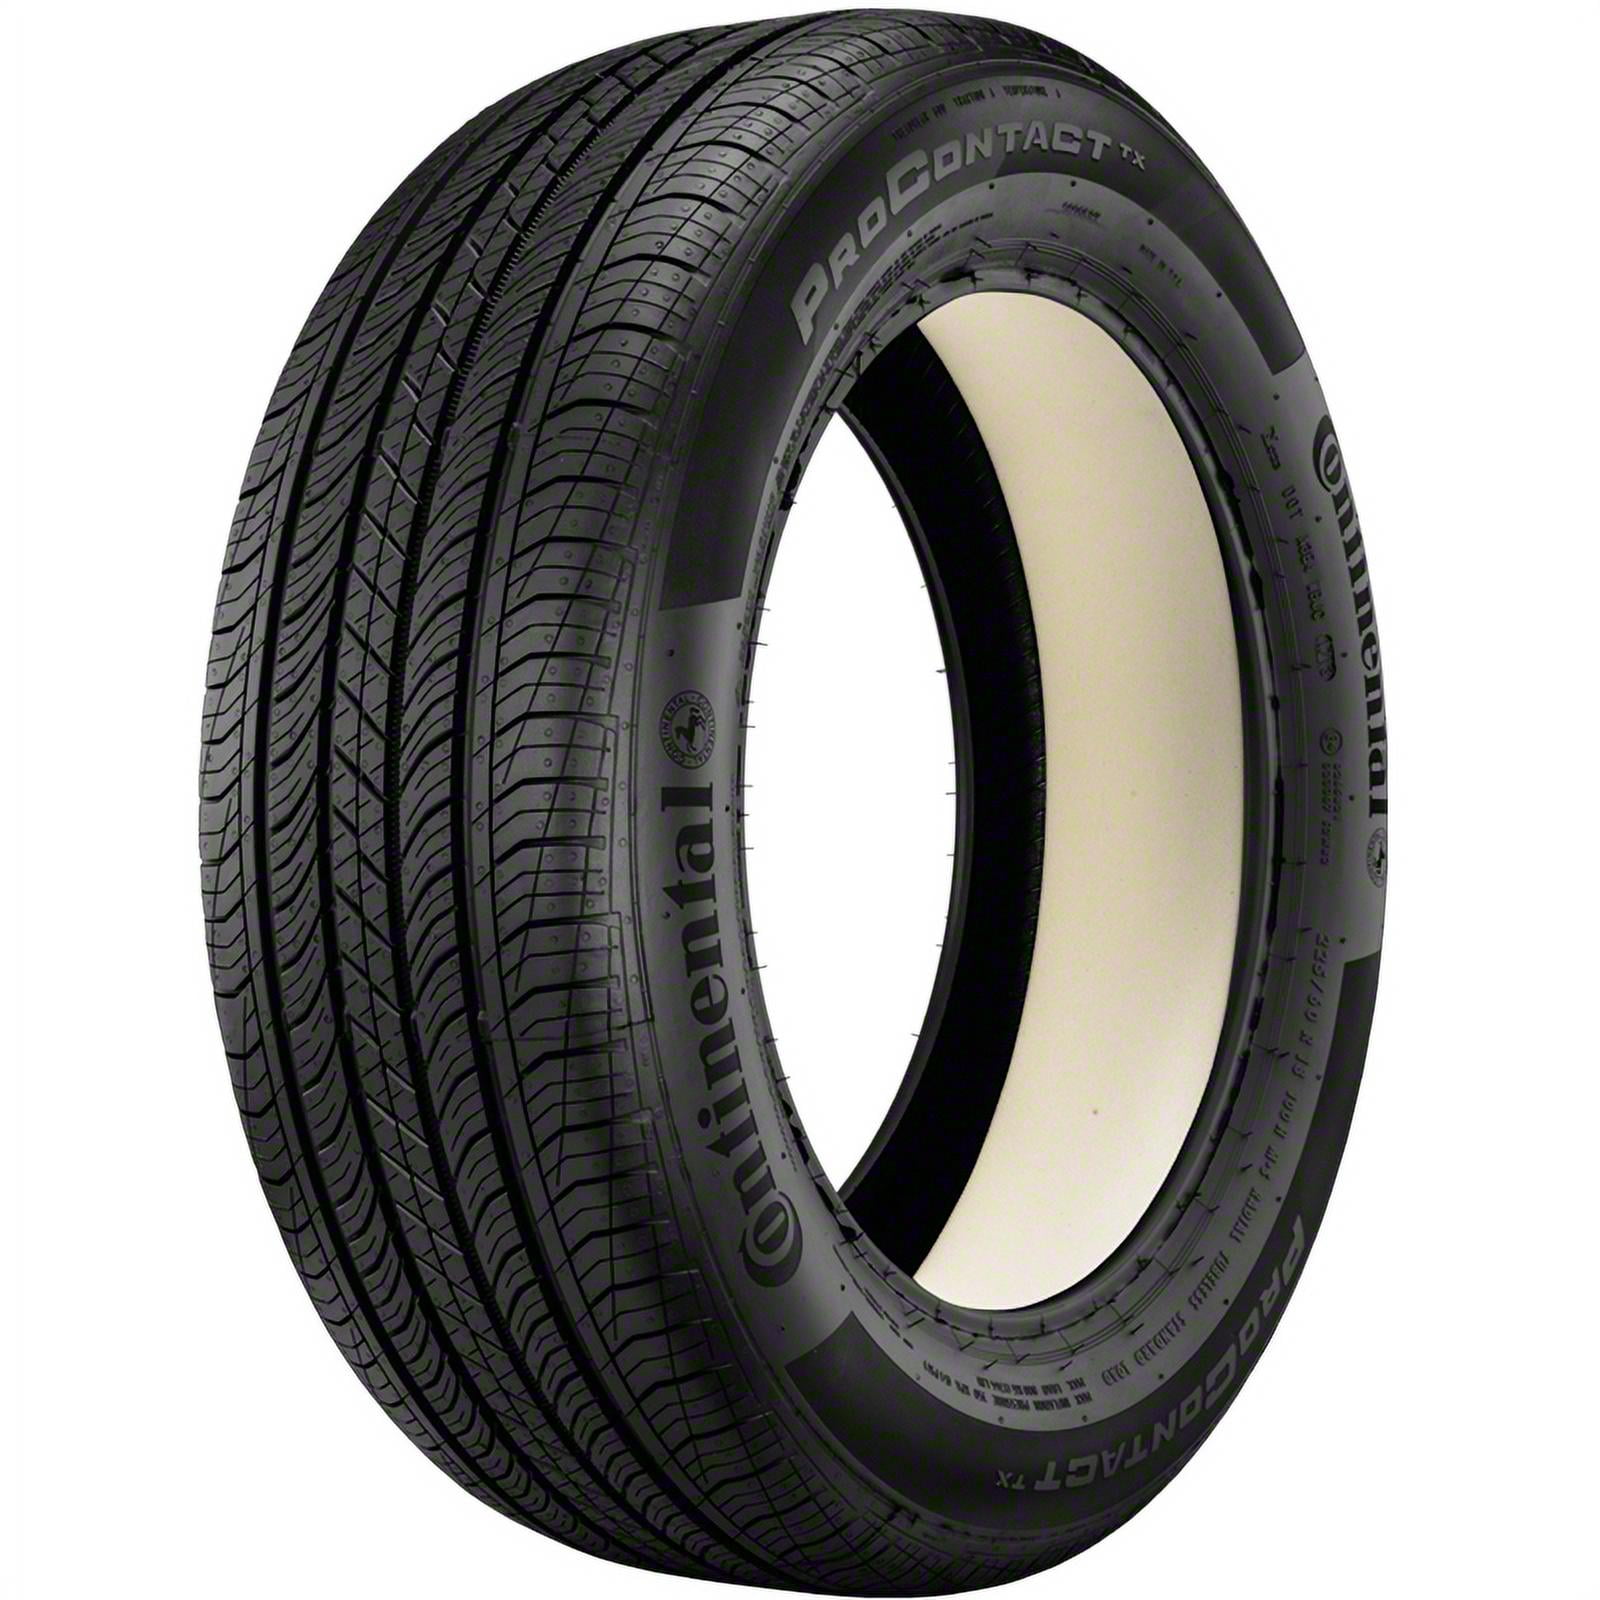 Continental Pro Contact TX Performance Radial Tire 245/45R18 100V 